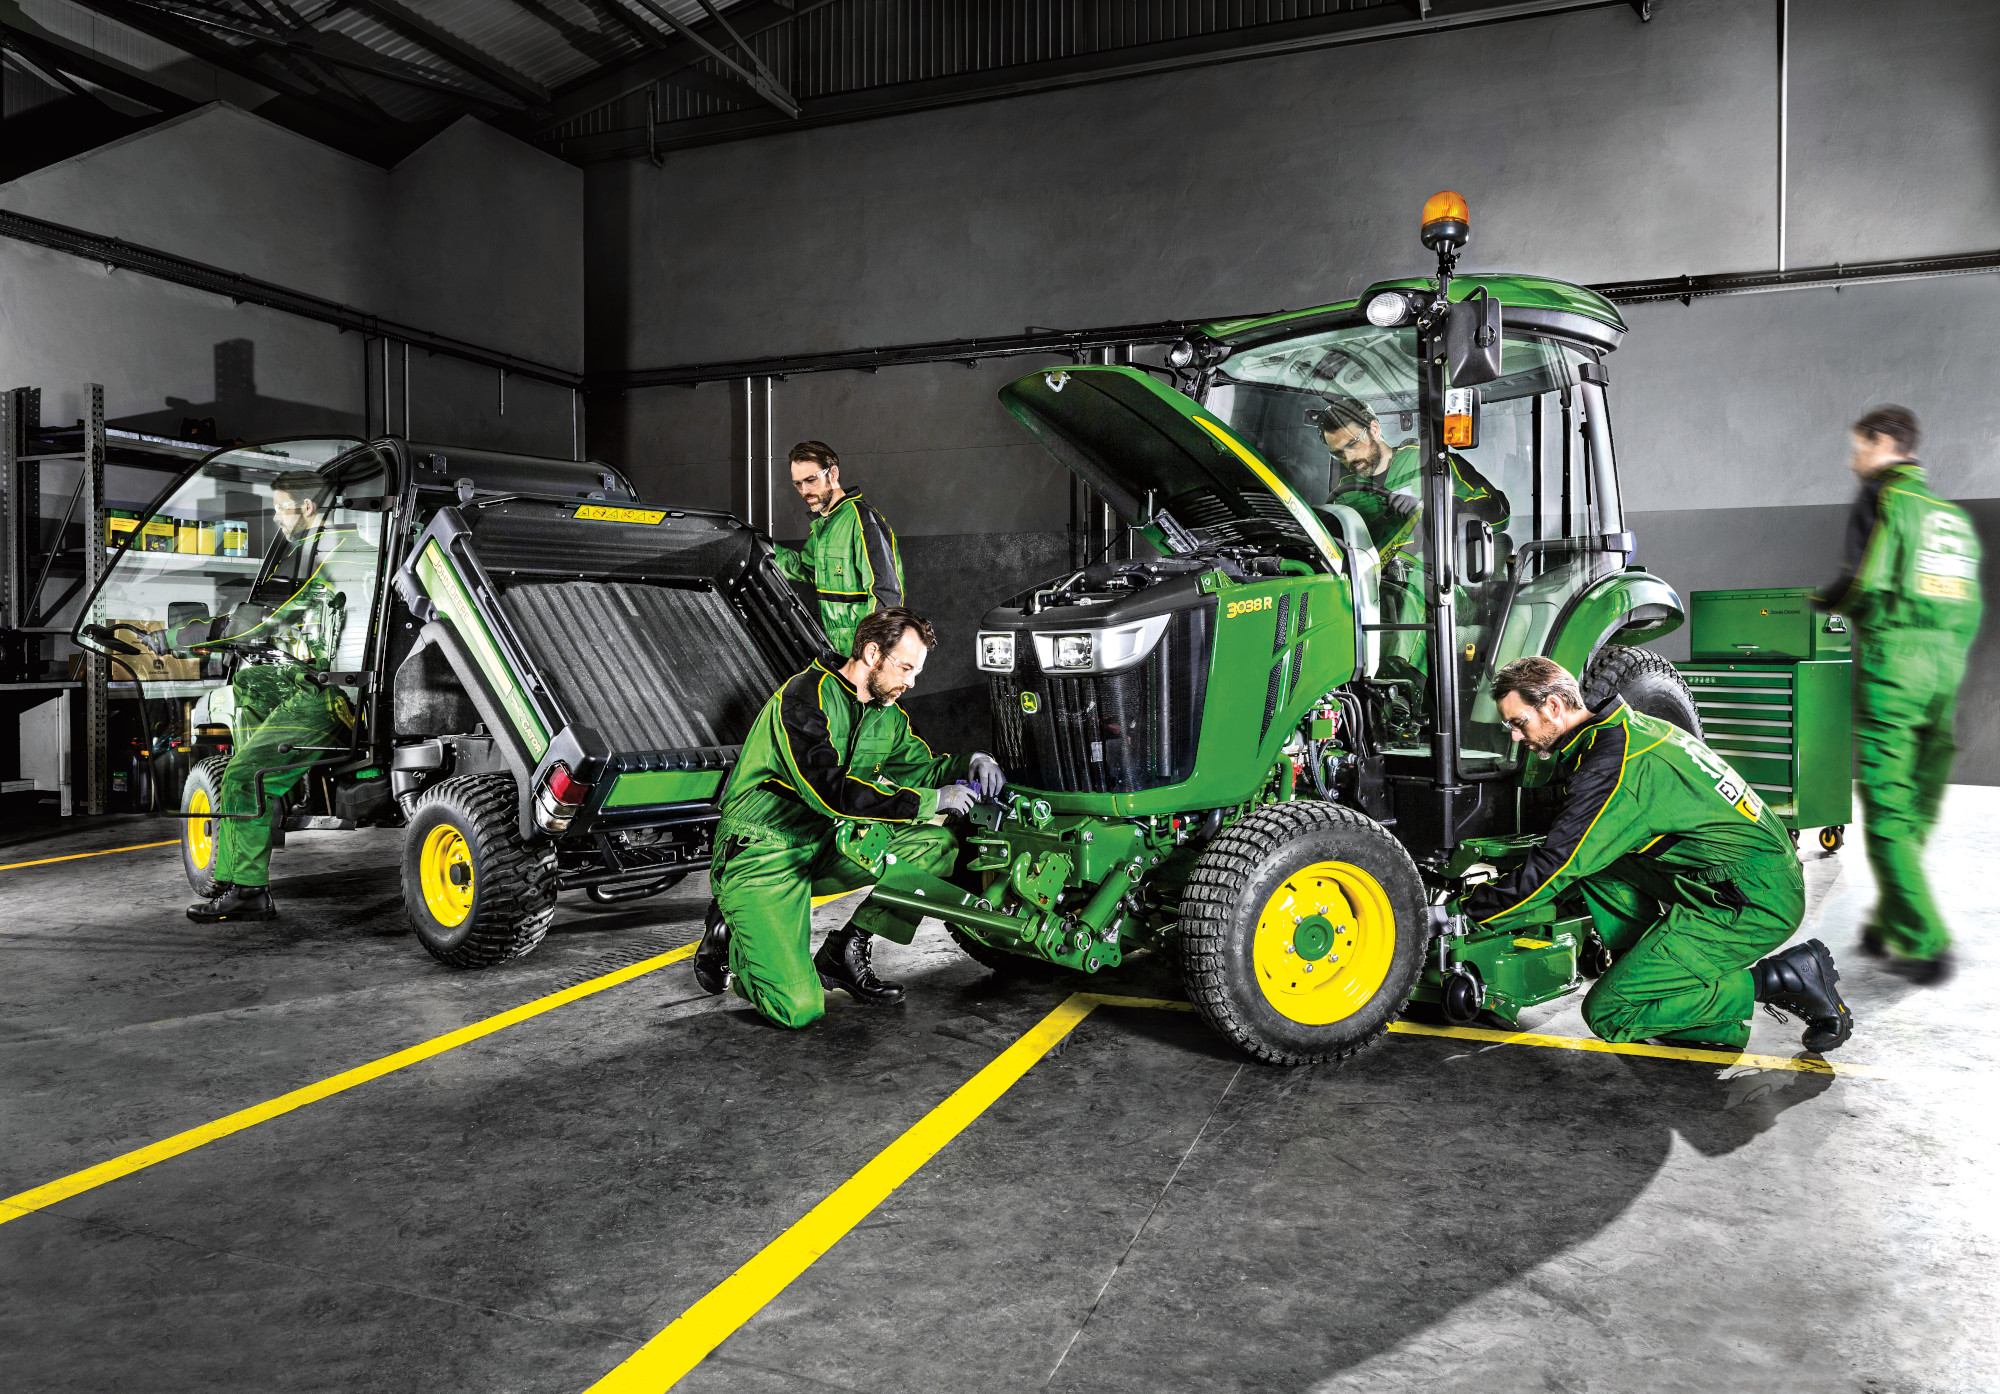 Used Groundcare Machinery for Sale: A Buyers Guide